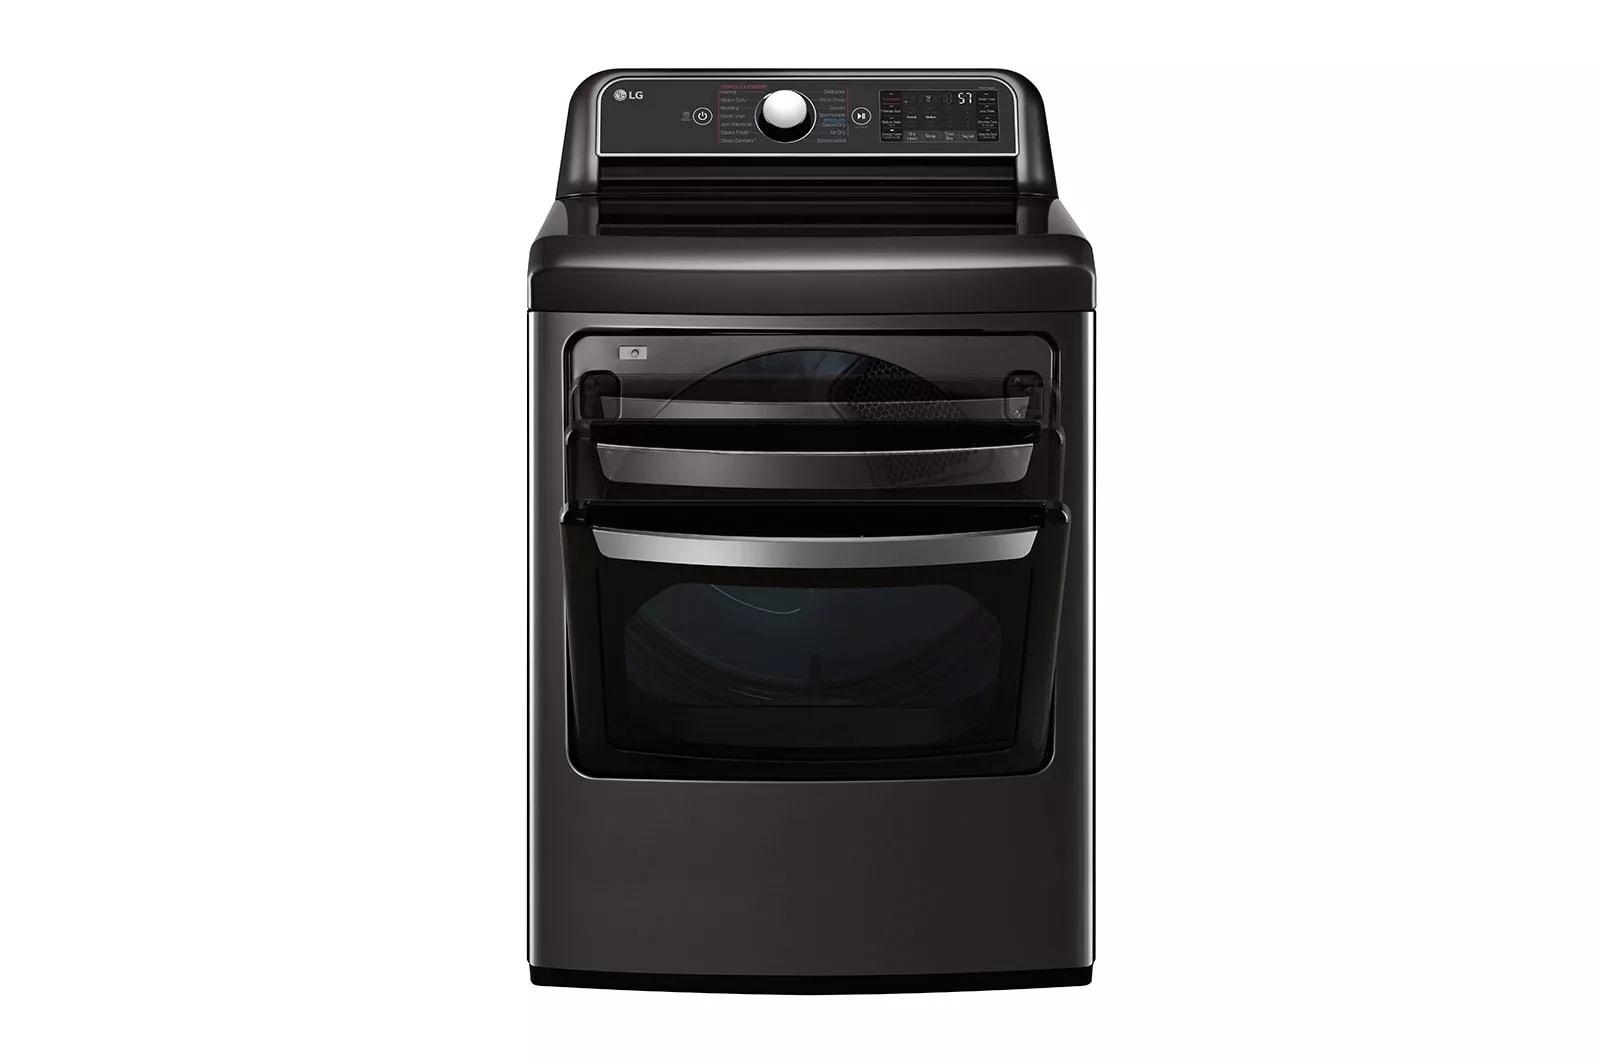 LG DLEX7900BE 7.3 Cu. Ft. Smart Wi-Fi Enabled Electric Dryer with TurboSteam - Black Steel - image 3 of 5